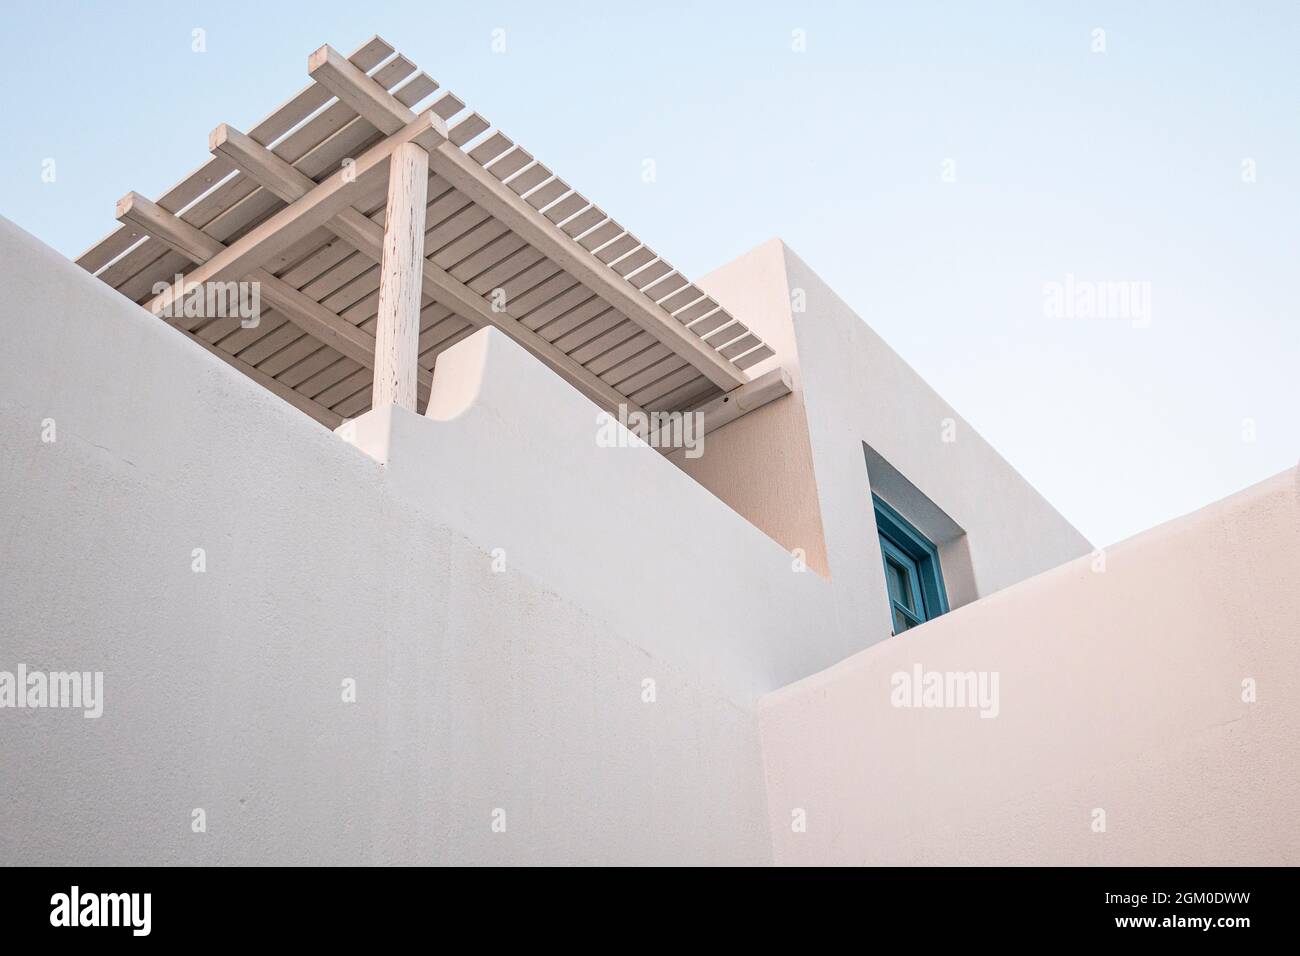 simple and classic architecture found on the Cyclades island painted in white with blue accents Stock Photo